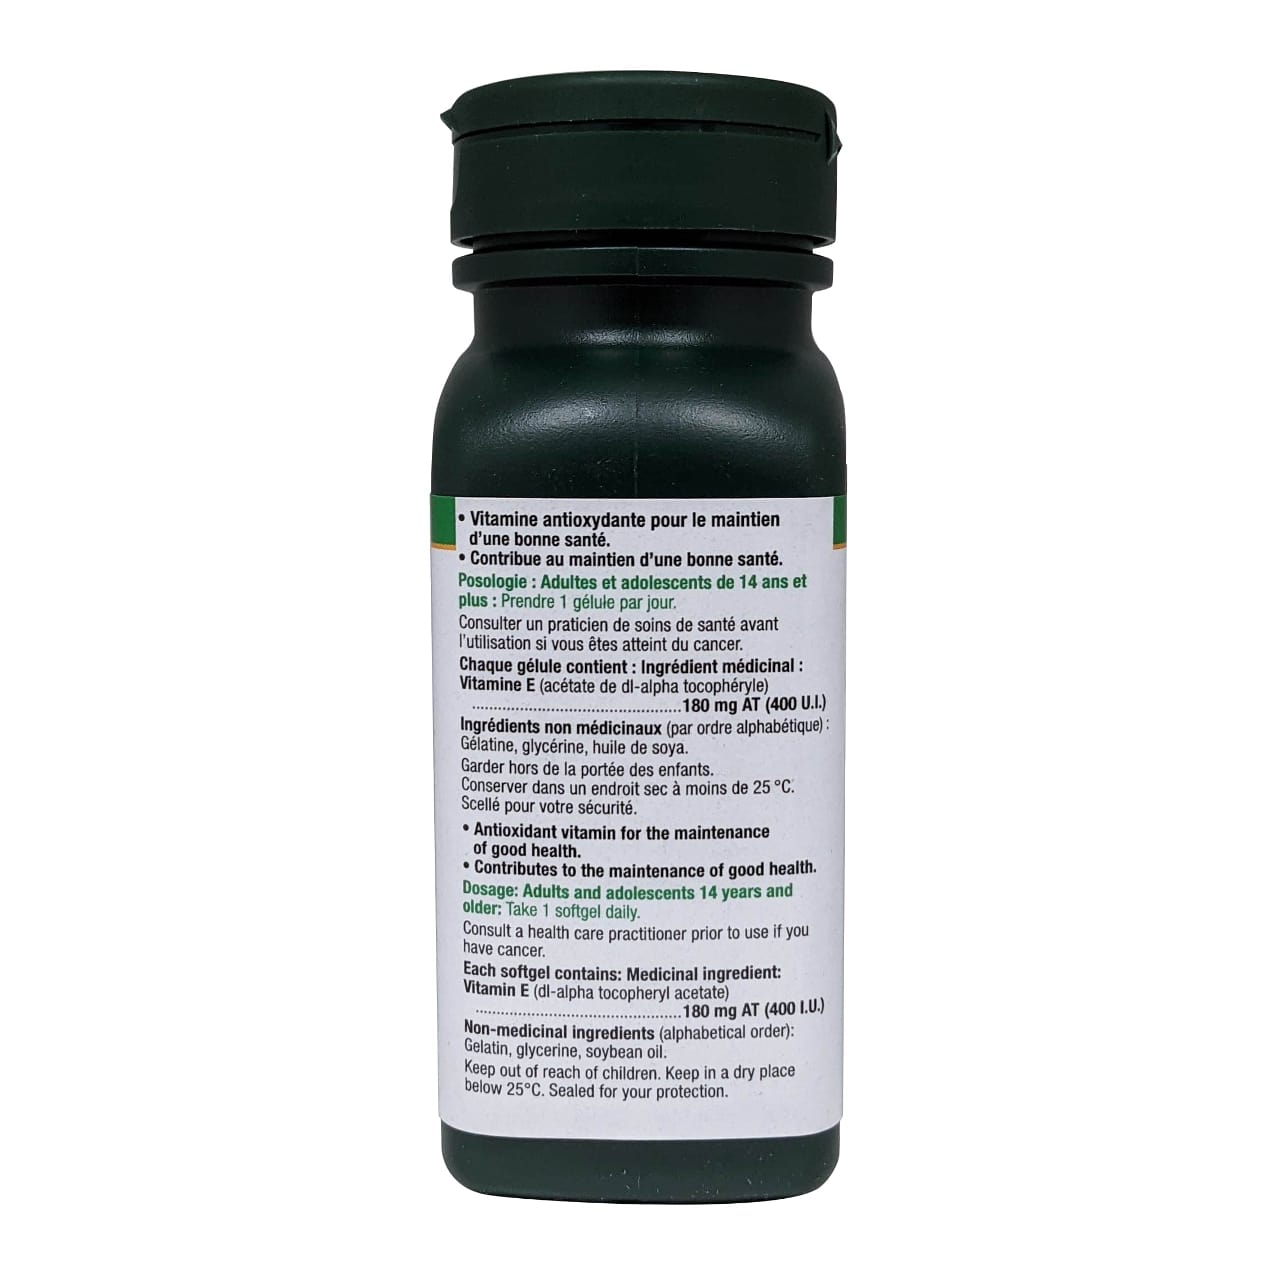 Product details, ingredients, directions, and warnings for Adrien Gagnon Vitamin E 400 IU